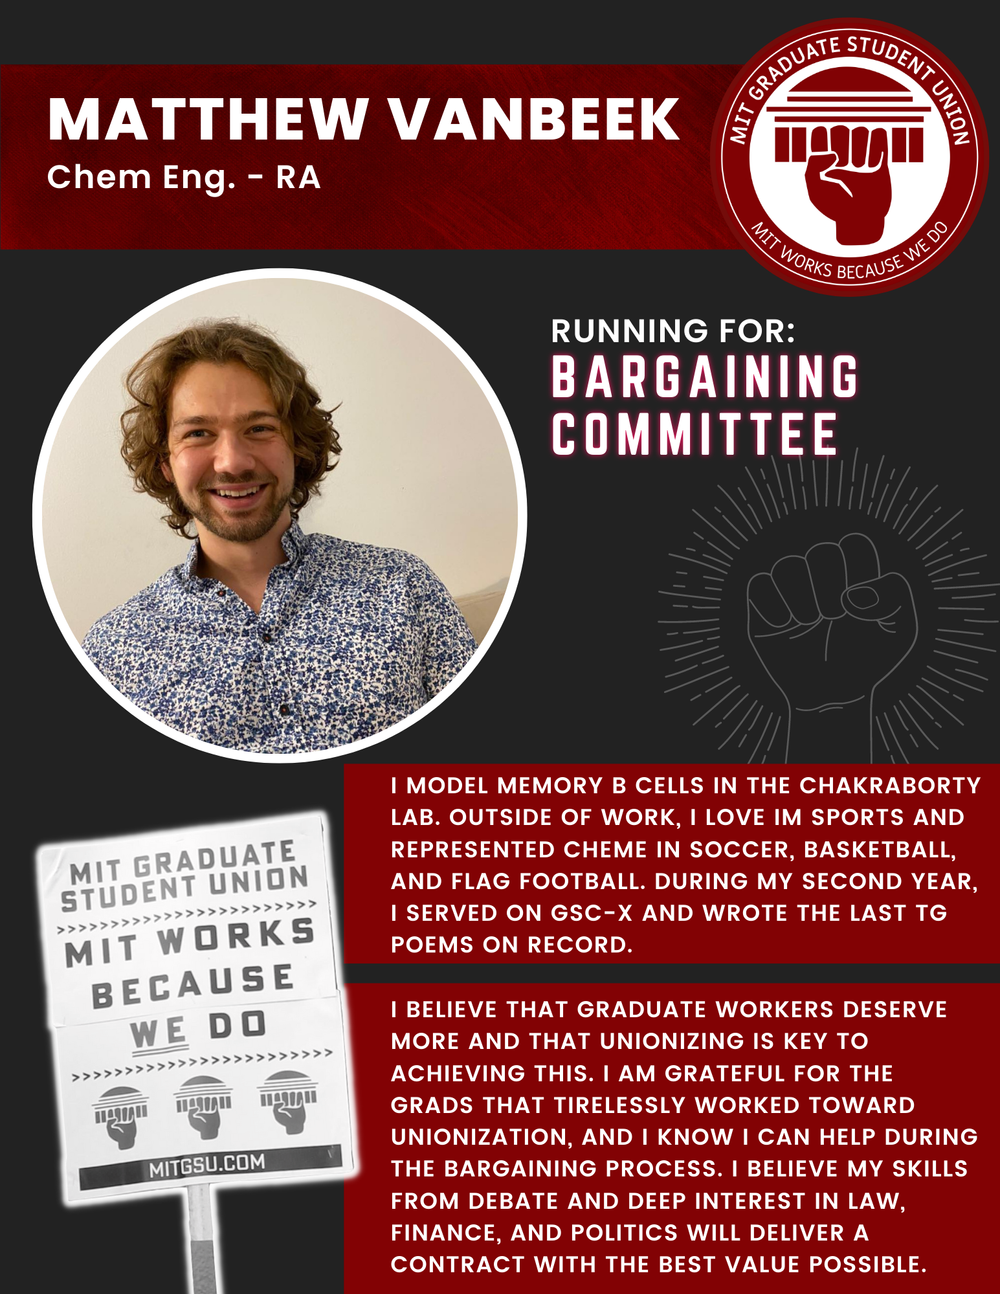  MATTHEW VANBEEK Chem Eng. - RA   RUNNING FOR: Bargaining Committee  I MODEL MEMORY B CELLS IN THE CHAKRABORTY LAB. OUTSIDE OF WORK, I LOVE IM SPORTS AND REPRESENTED CHEME IN SOCCER, BASKETBALL,  AND FLAG FOOTBALL. DURING MY SECOND YEAR,  I SERVED ON